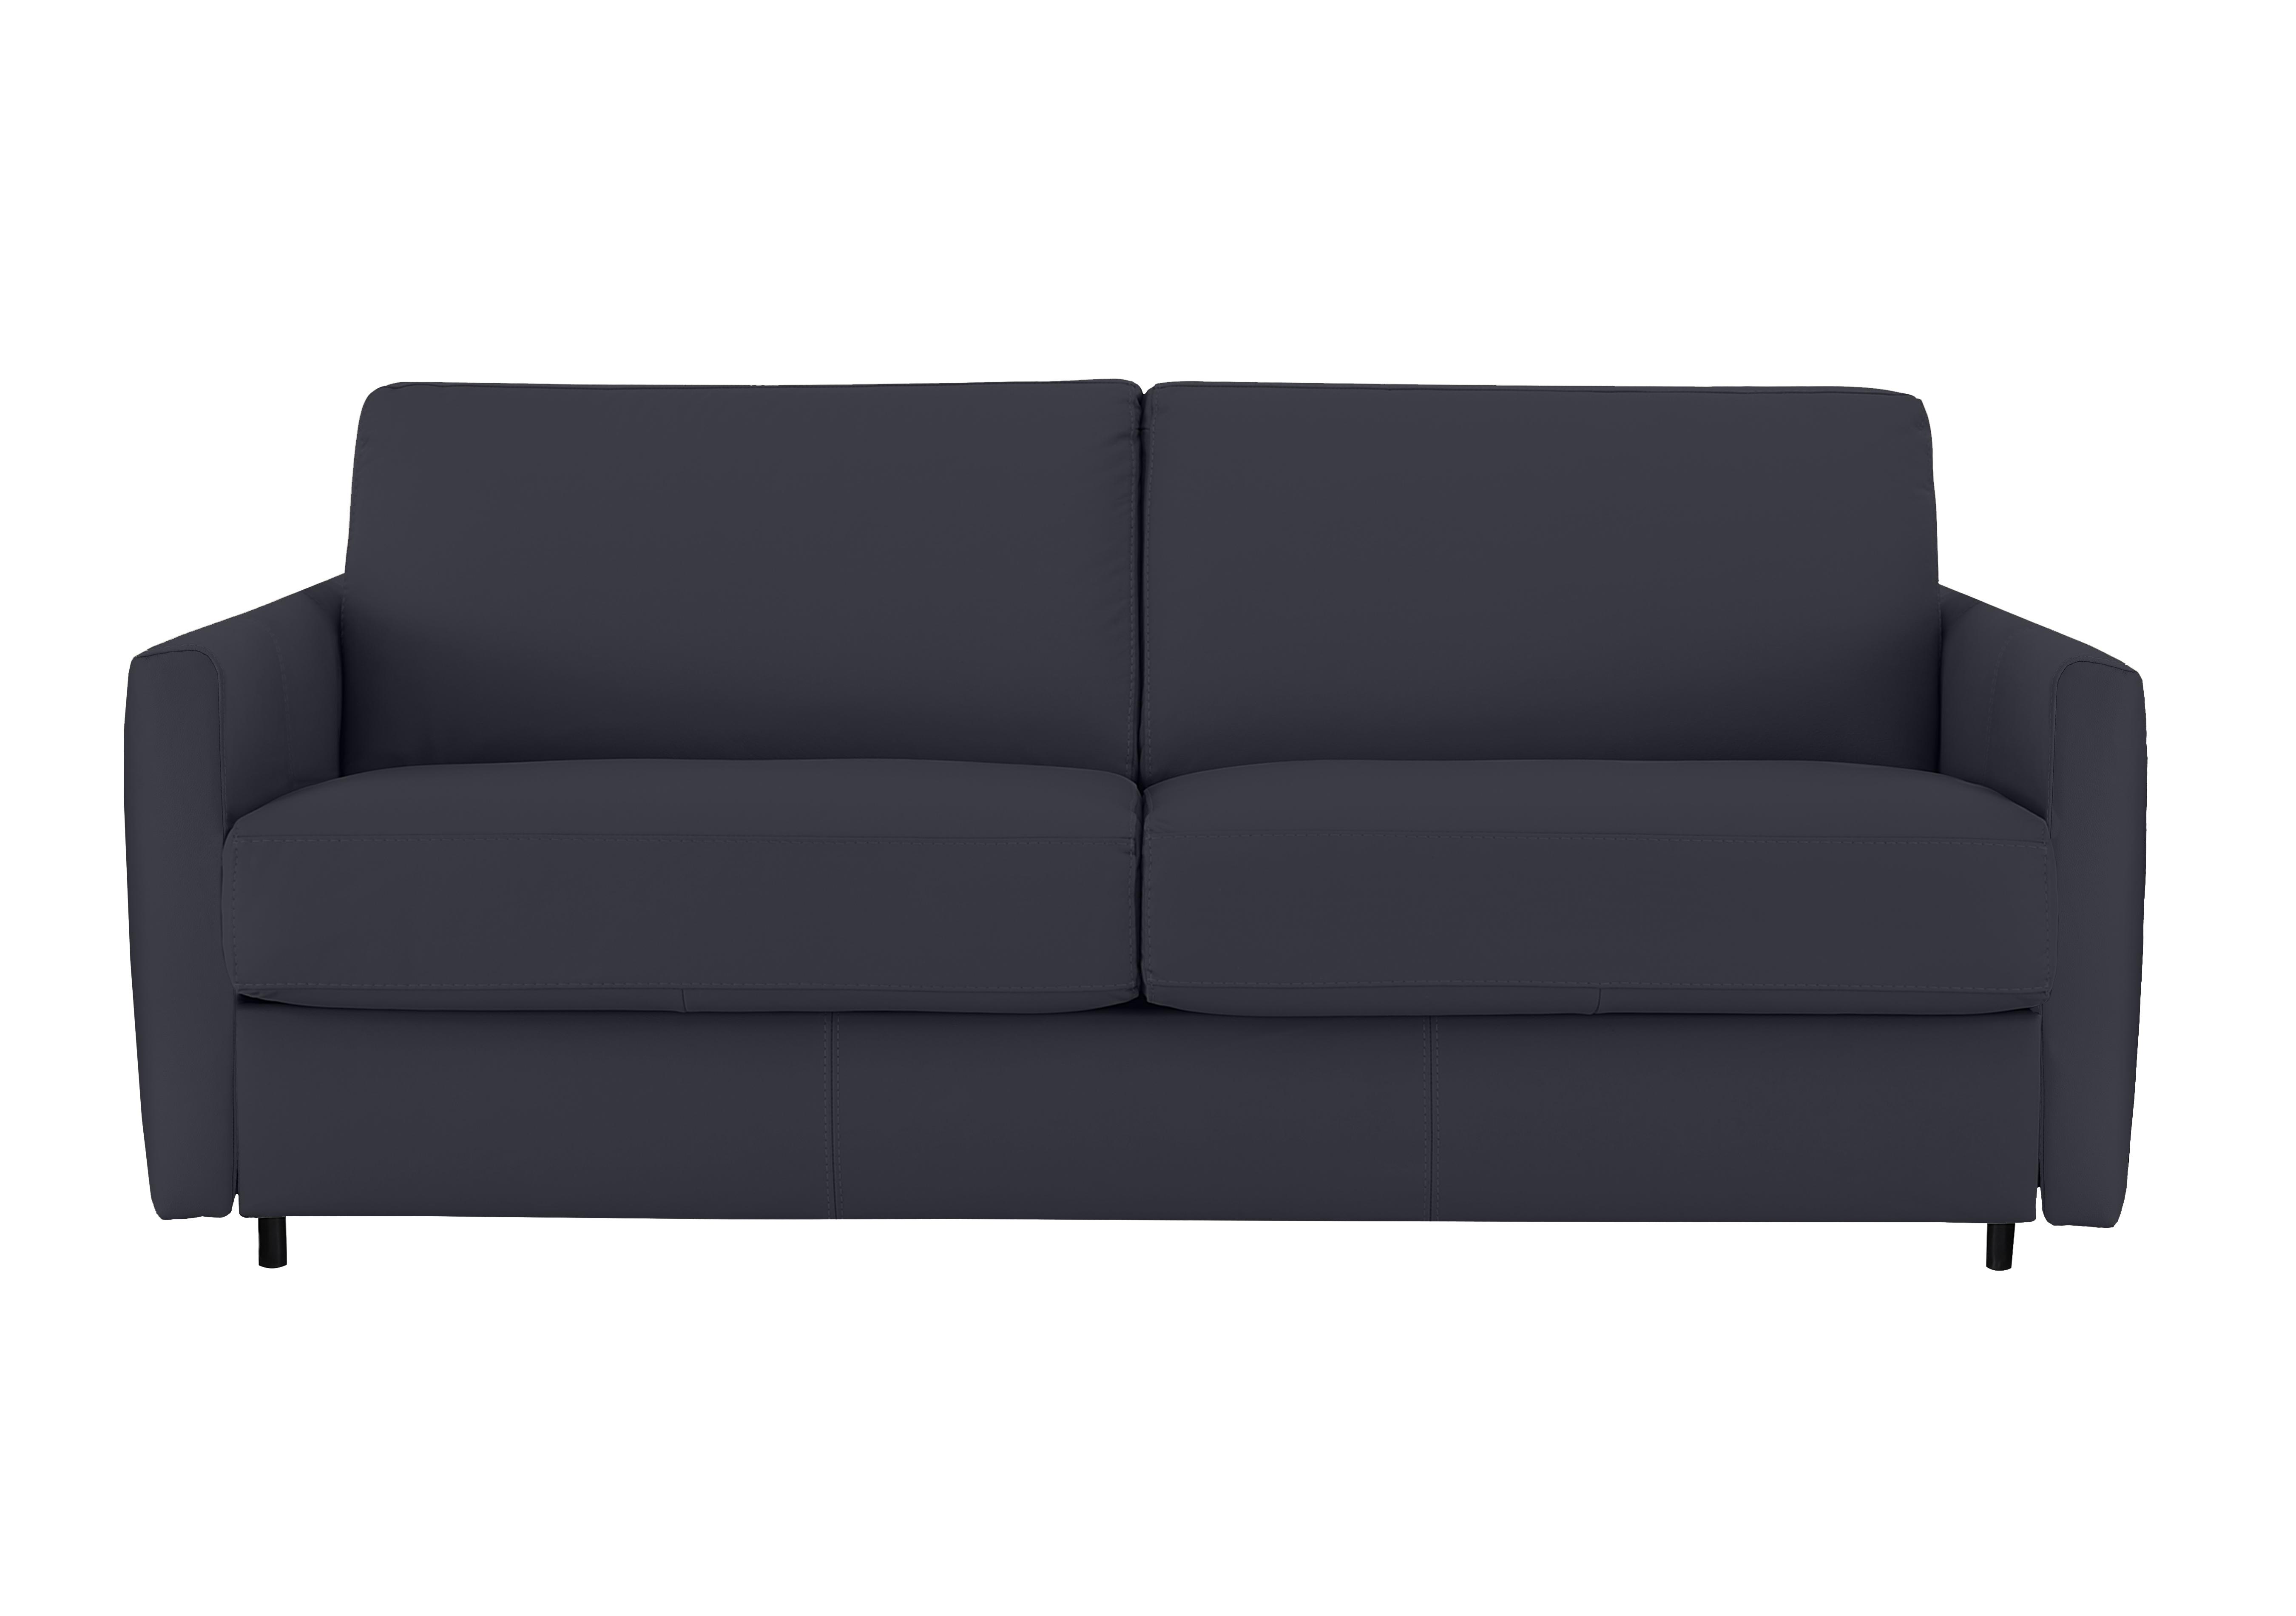 Alcova 3 Seater Leather Sofa Bed with Slim Arms in Torello Blu 81 on Furniture Village